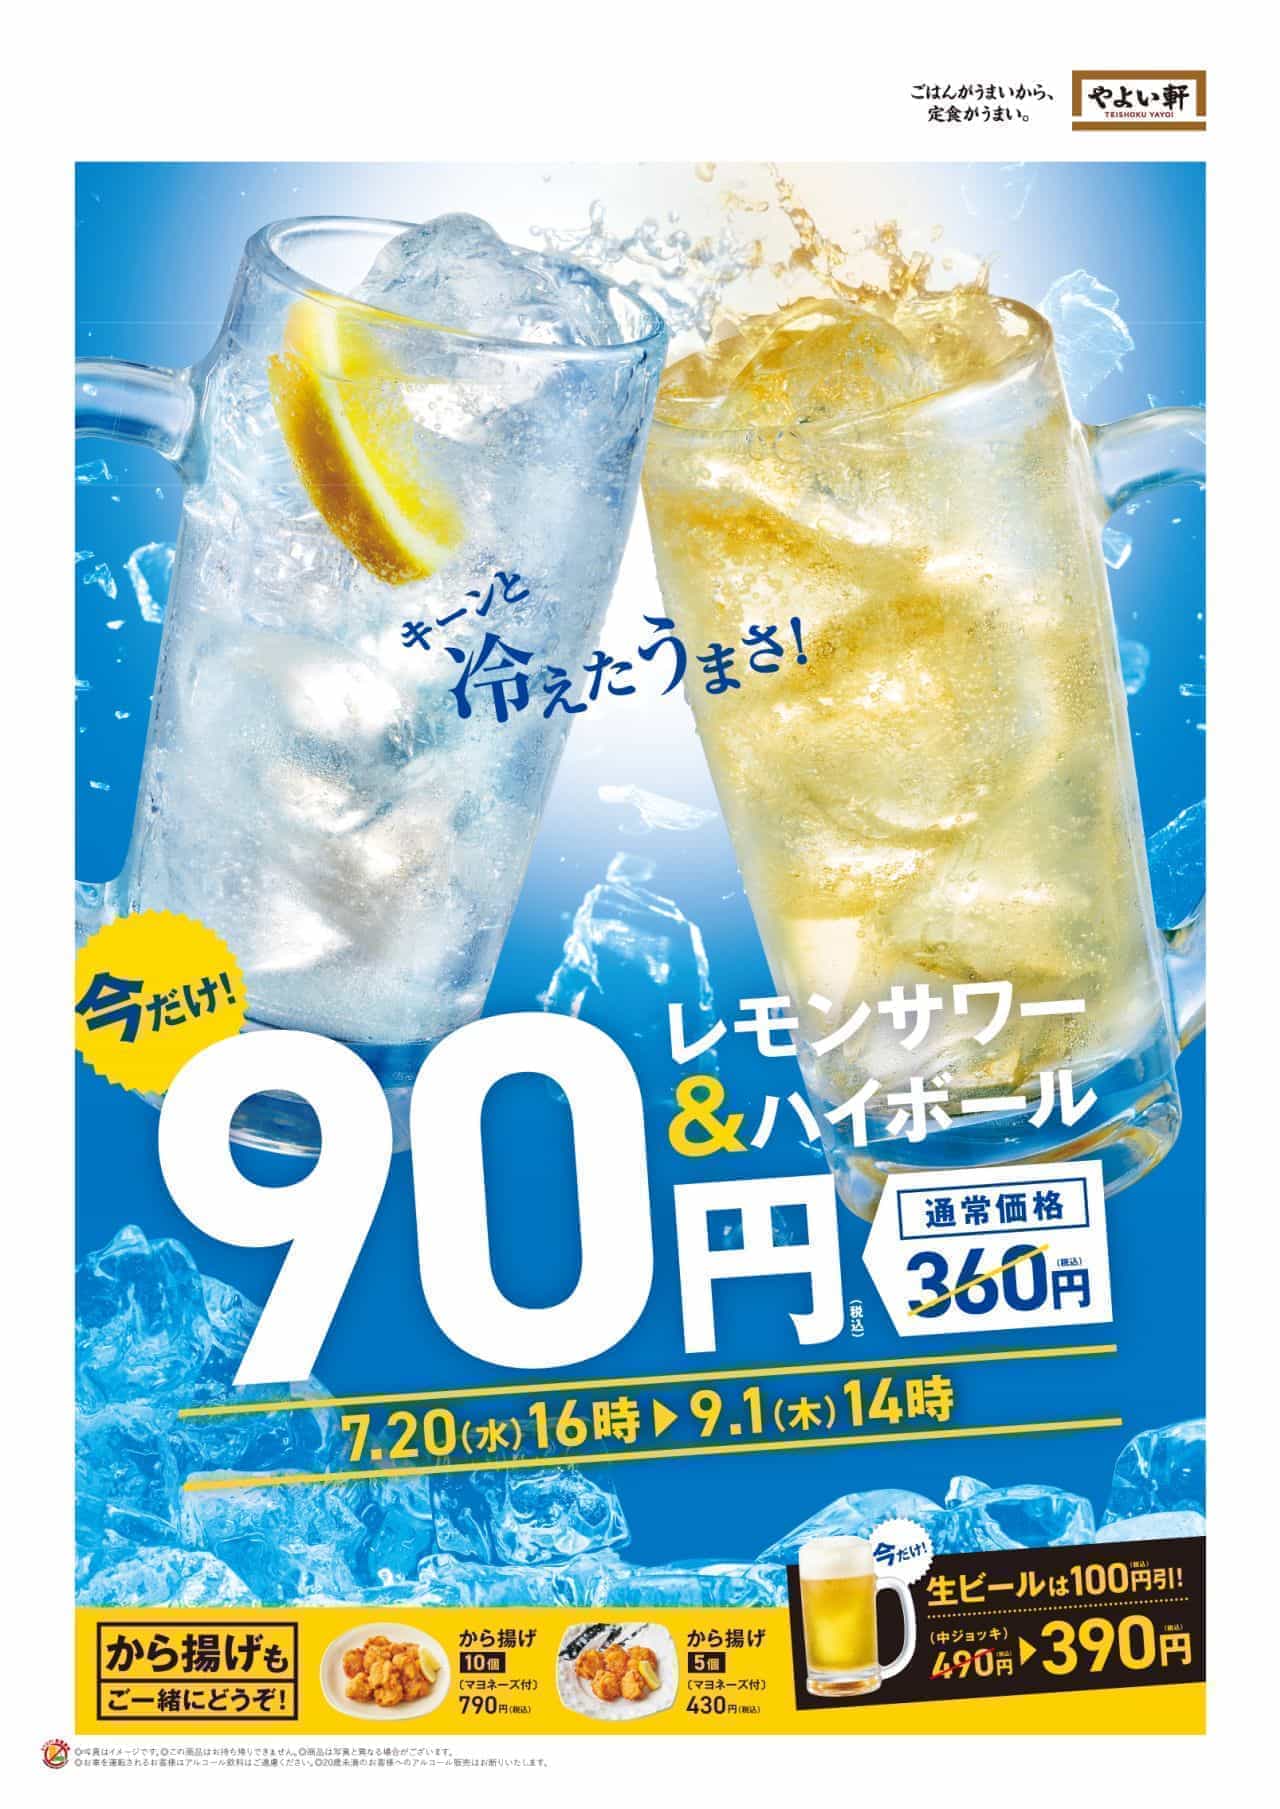 Special prices for Yayoiken "Lemon Sour", "High Ball" and "Draft Beer